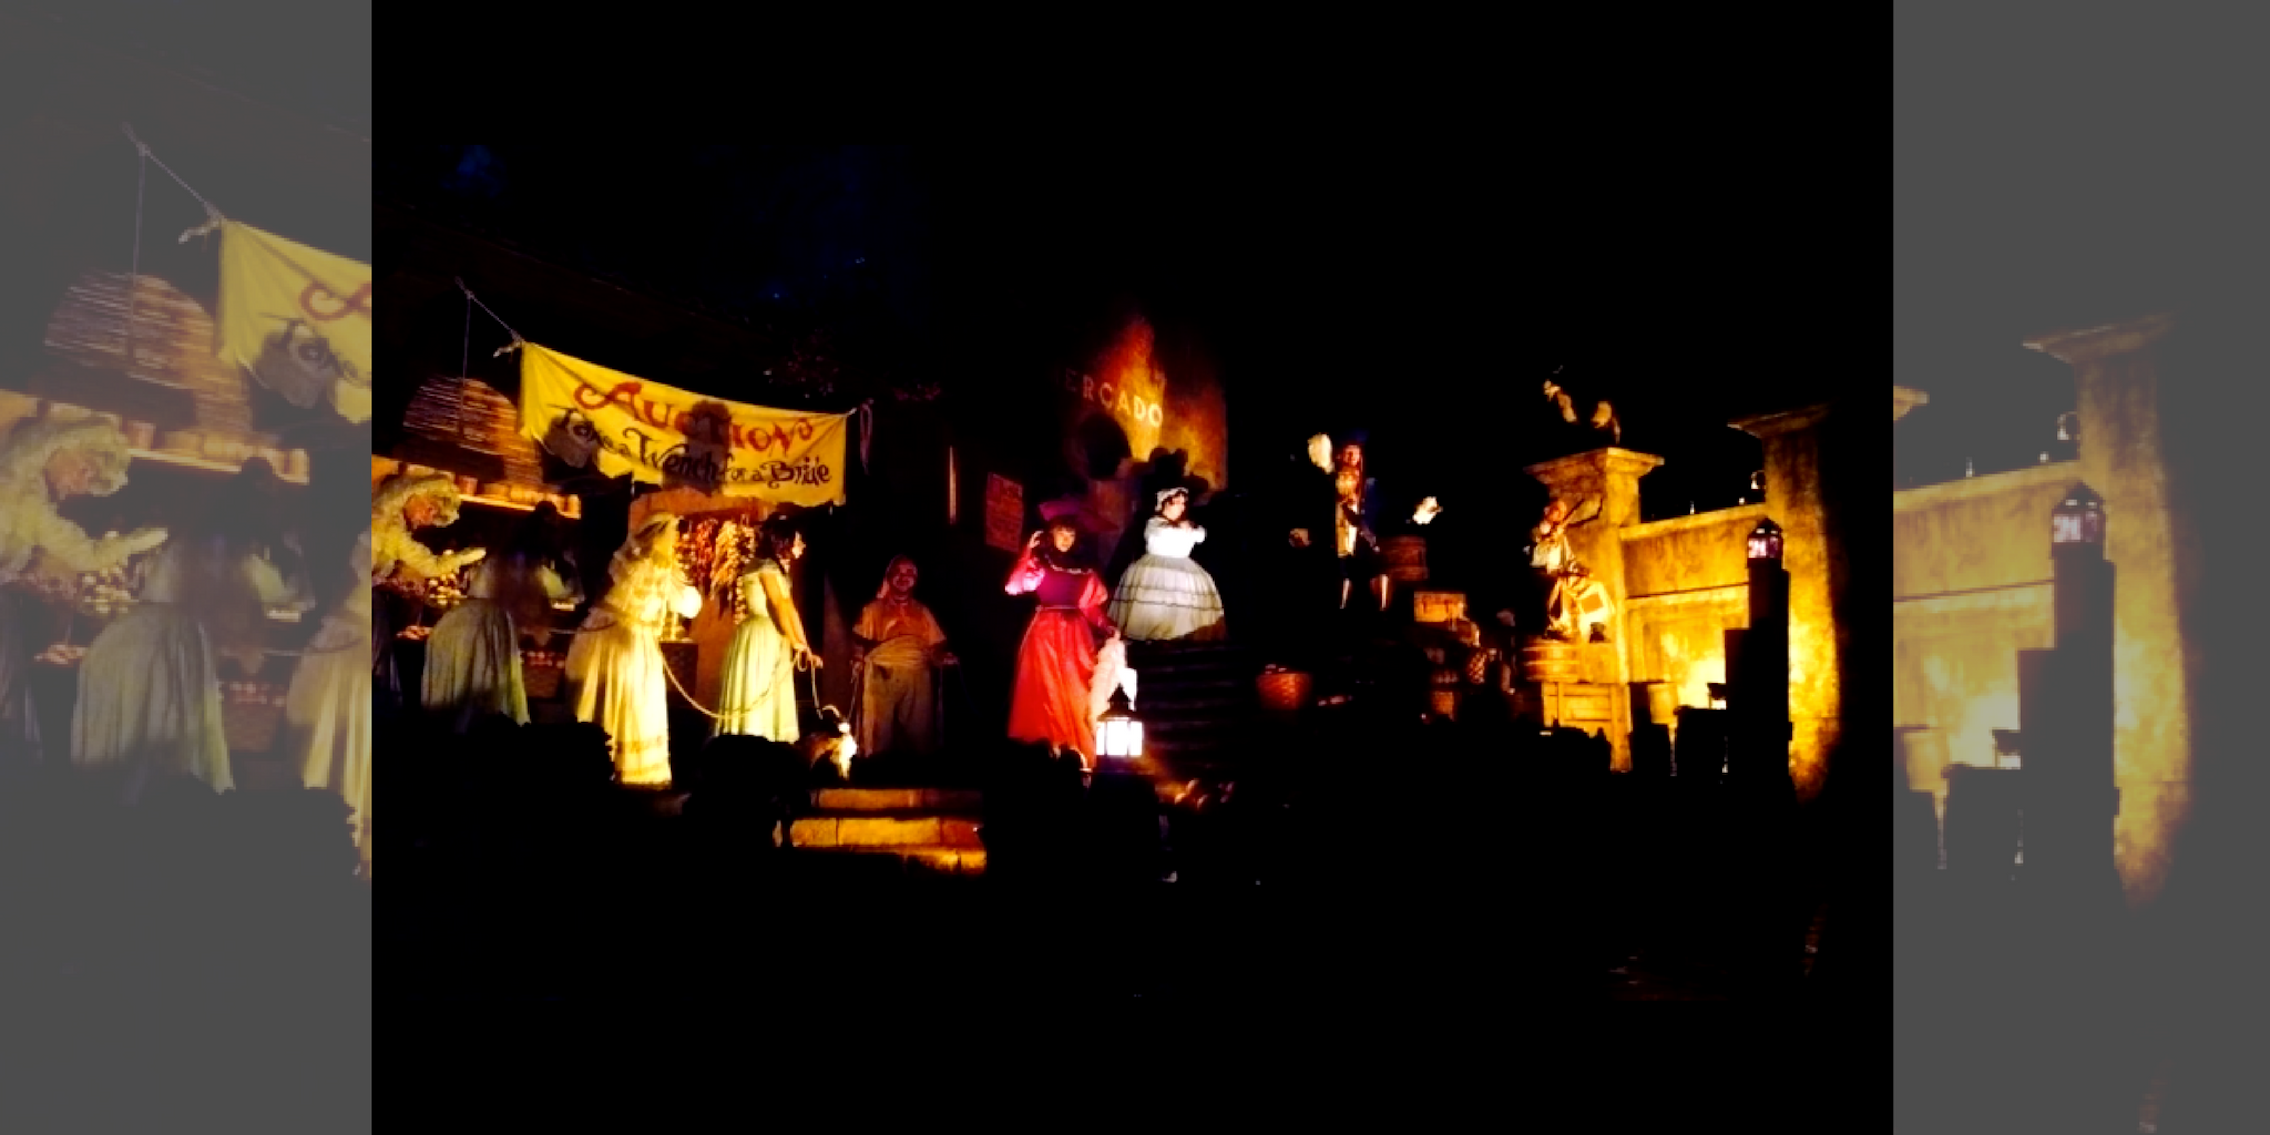 The Pirates of the Caribbean ride's bride auction scene